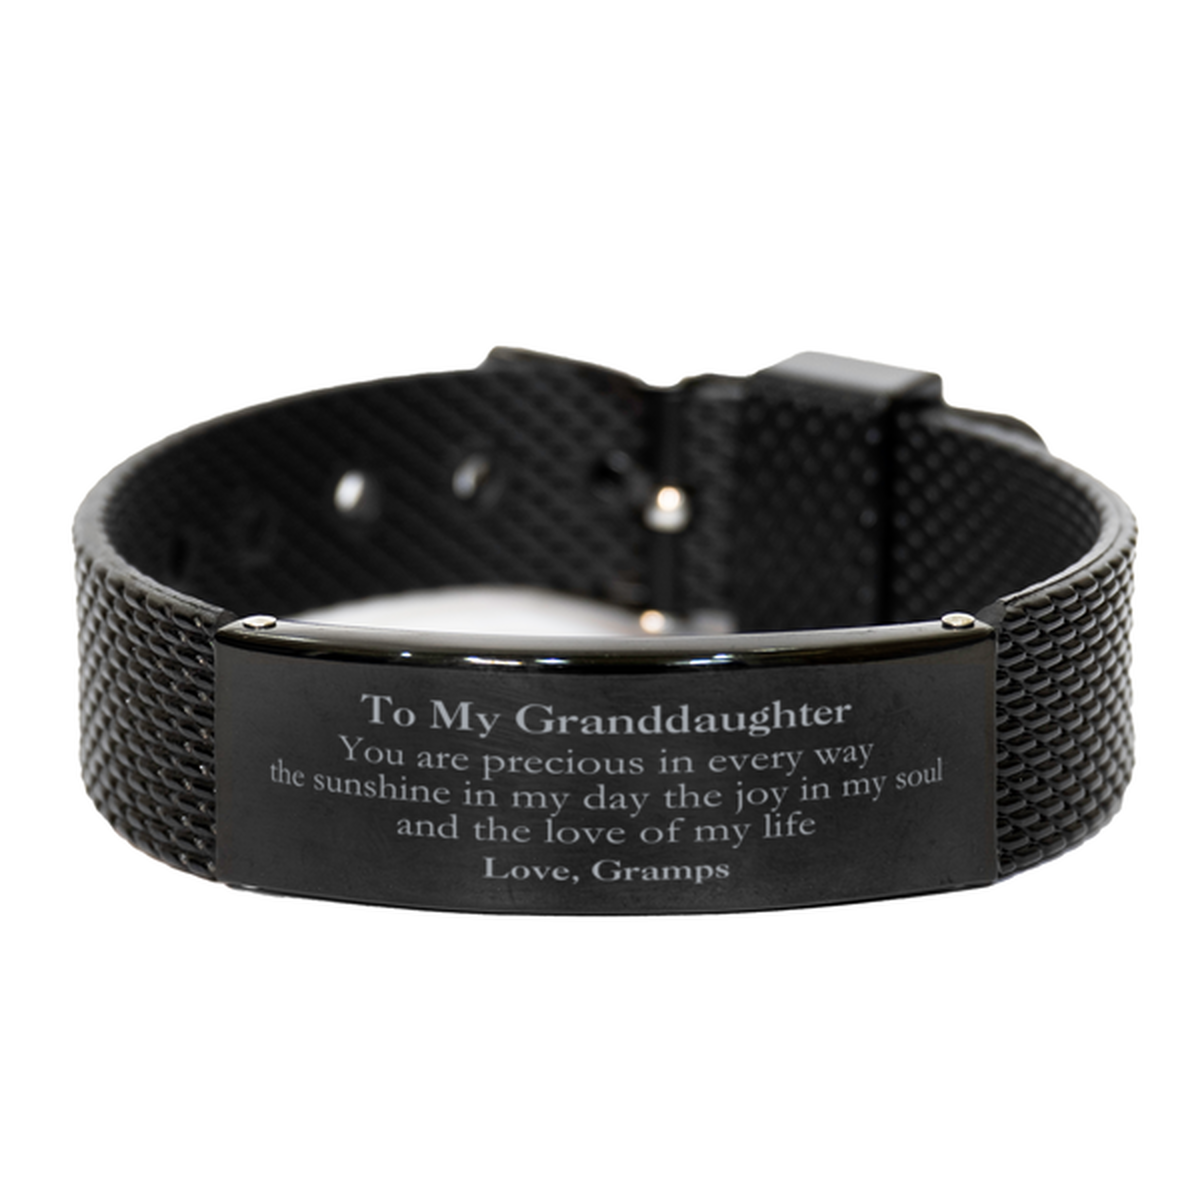 Graduation Gifts for Granddaughter Black Shark Mesh Bracelet Present from Gramps, Christmas Granddaughter Birthday Gifts Granddaughter You are precious in every way the sunshine in my day. Love, Gramps